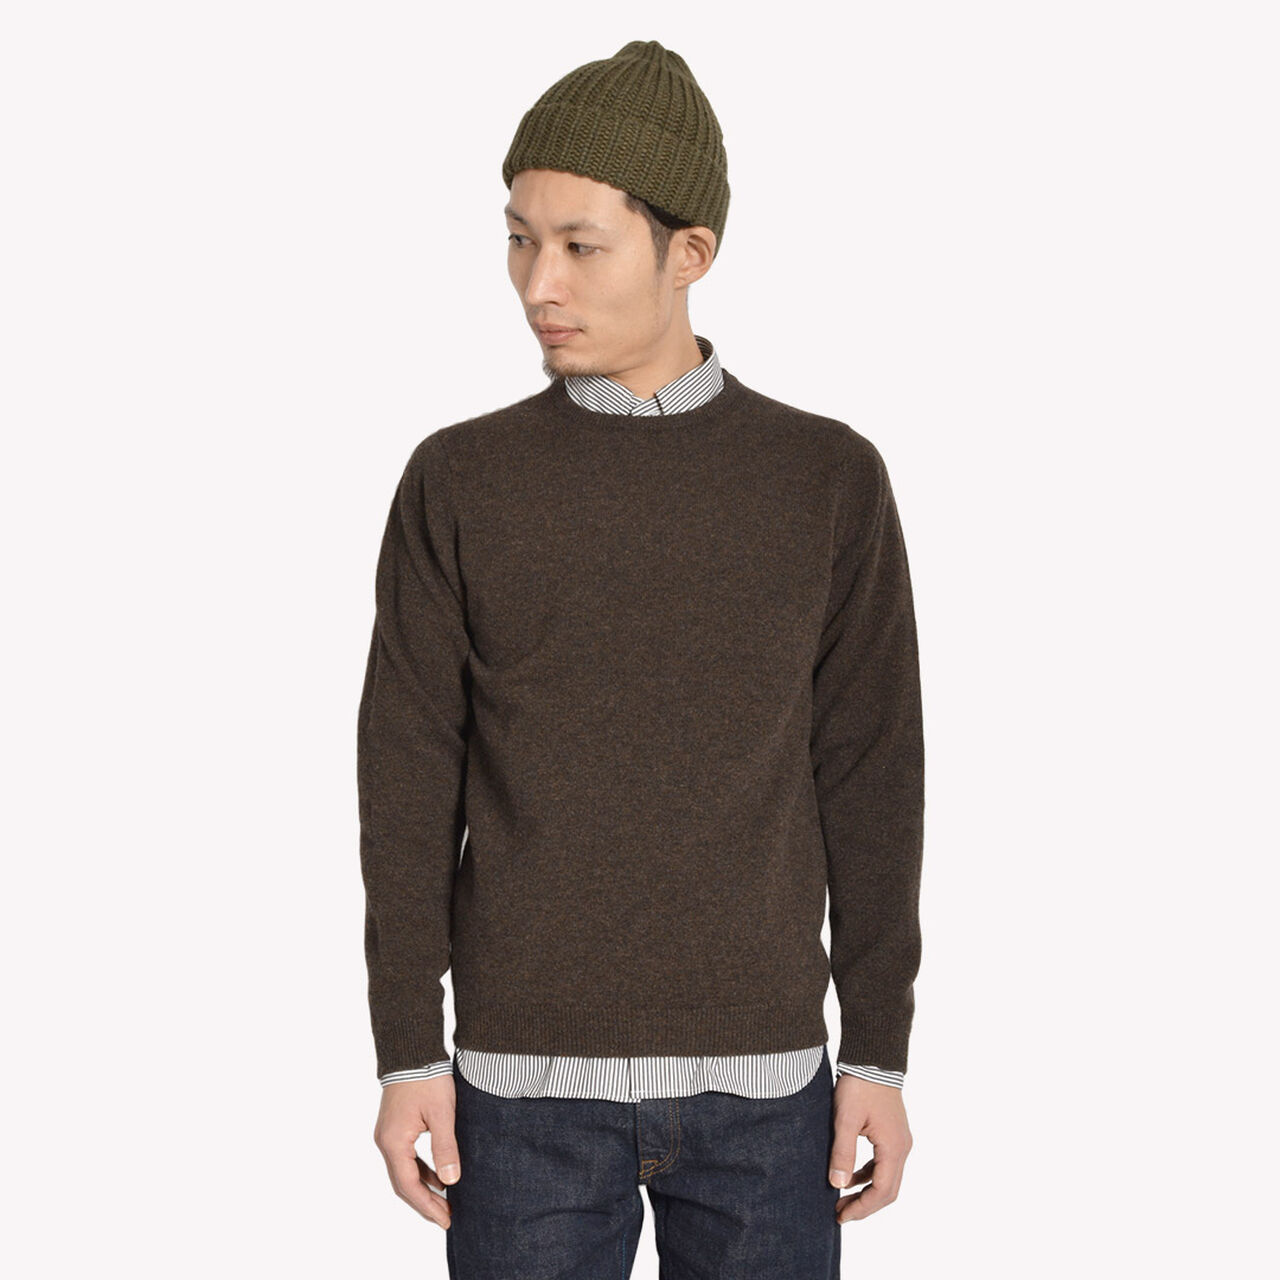 Lambswool crew neck knit,Cocoa, large image number 0